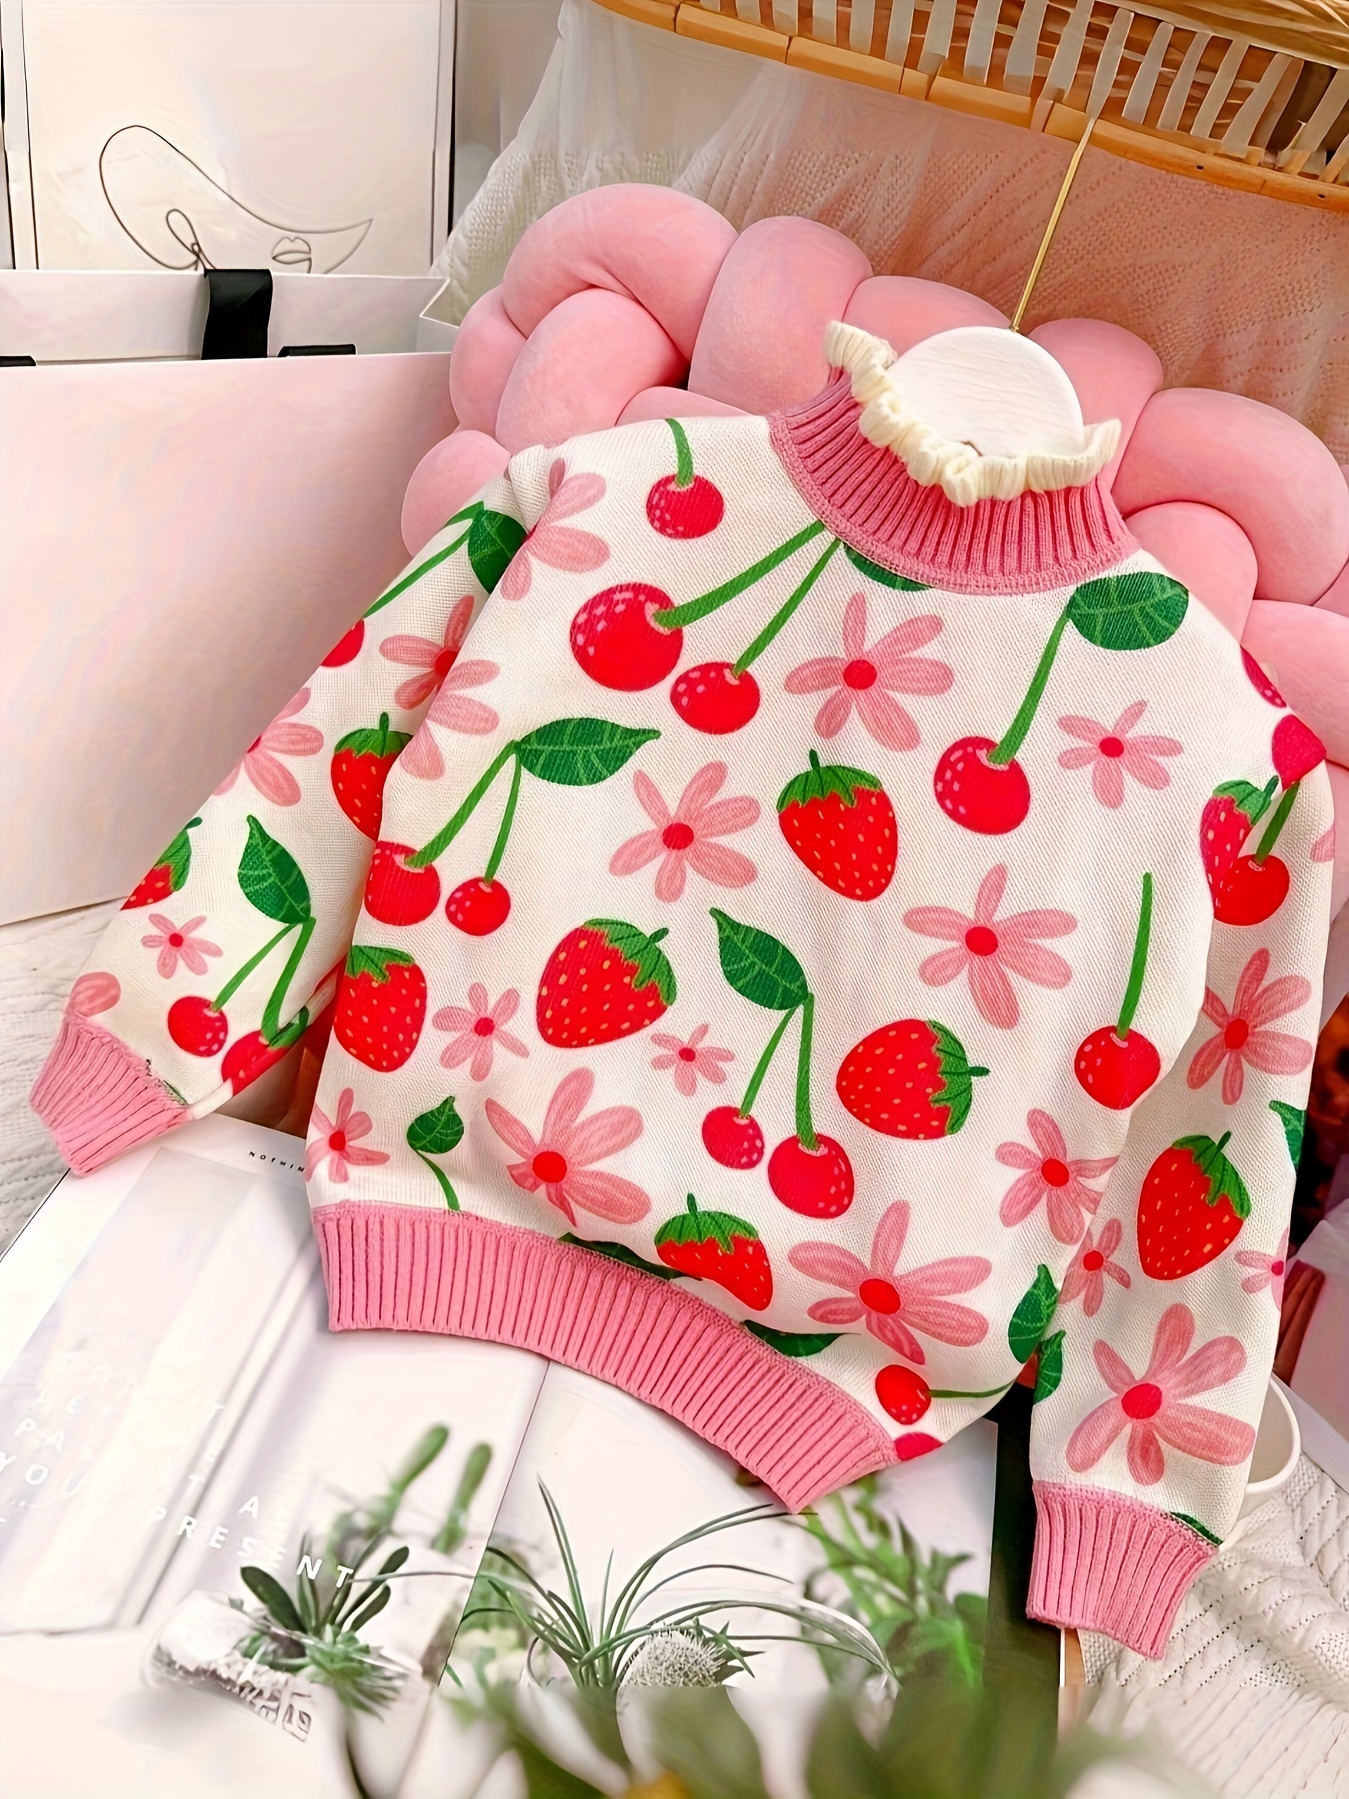 Girls' Frill Collar Strawberry Blossom Pattern Knitted Sweater Pullover,  Stylish & Warm Jumper Tops For Fall / Winter